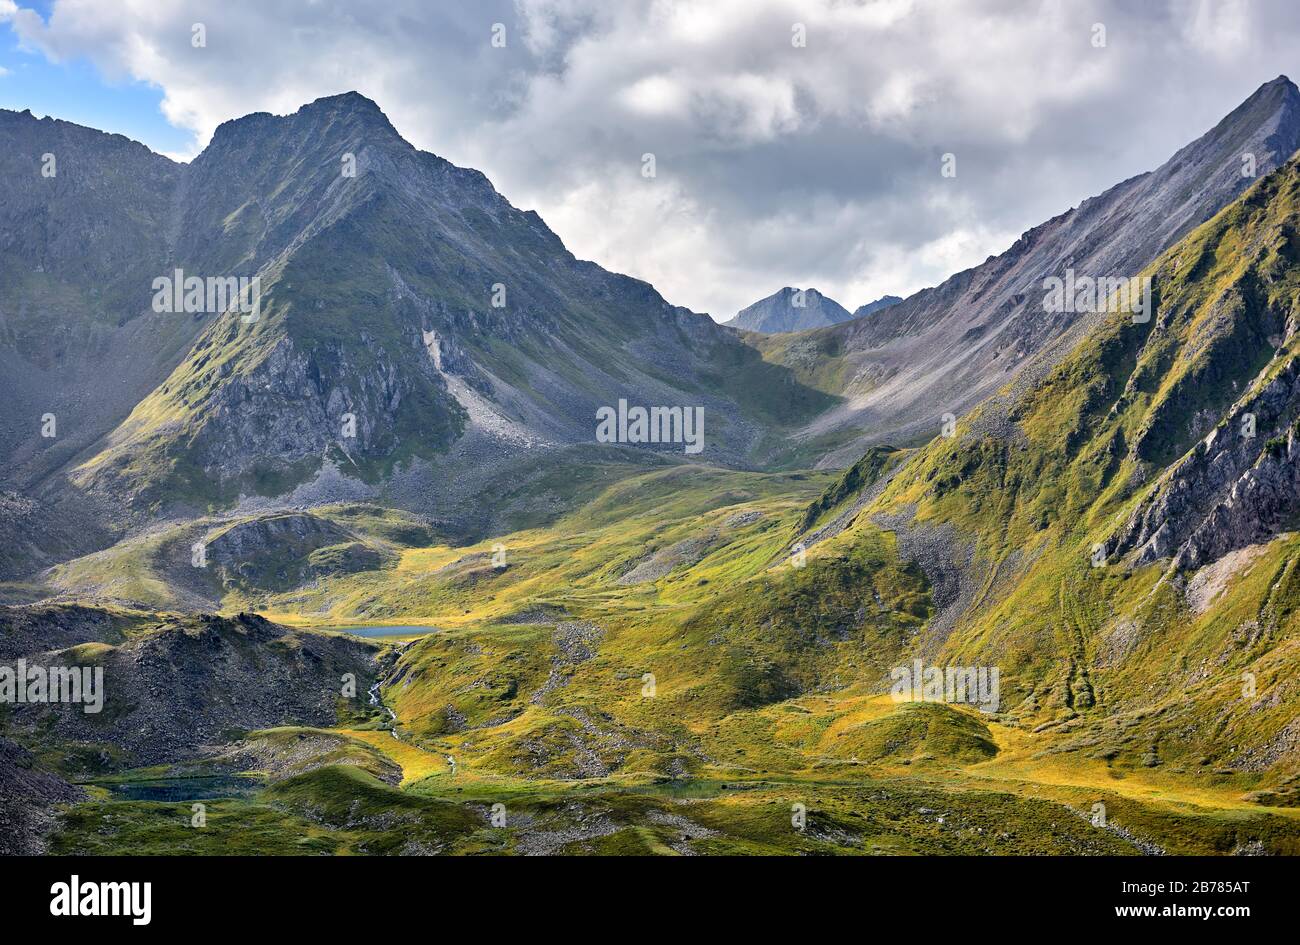 Alpine tundra and lakes at head of Siberian river. The upper part of the mountain valley is of glacial origin. Sunlight illuminates selected areas of Stock Photo